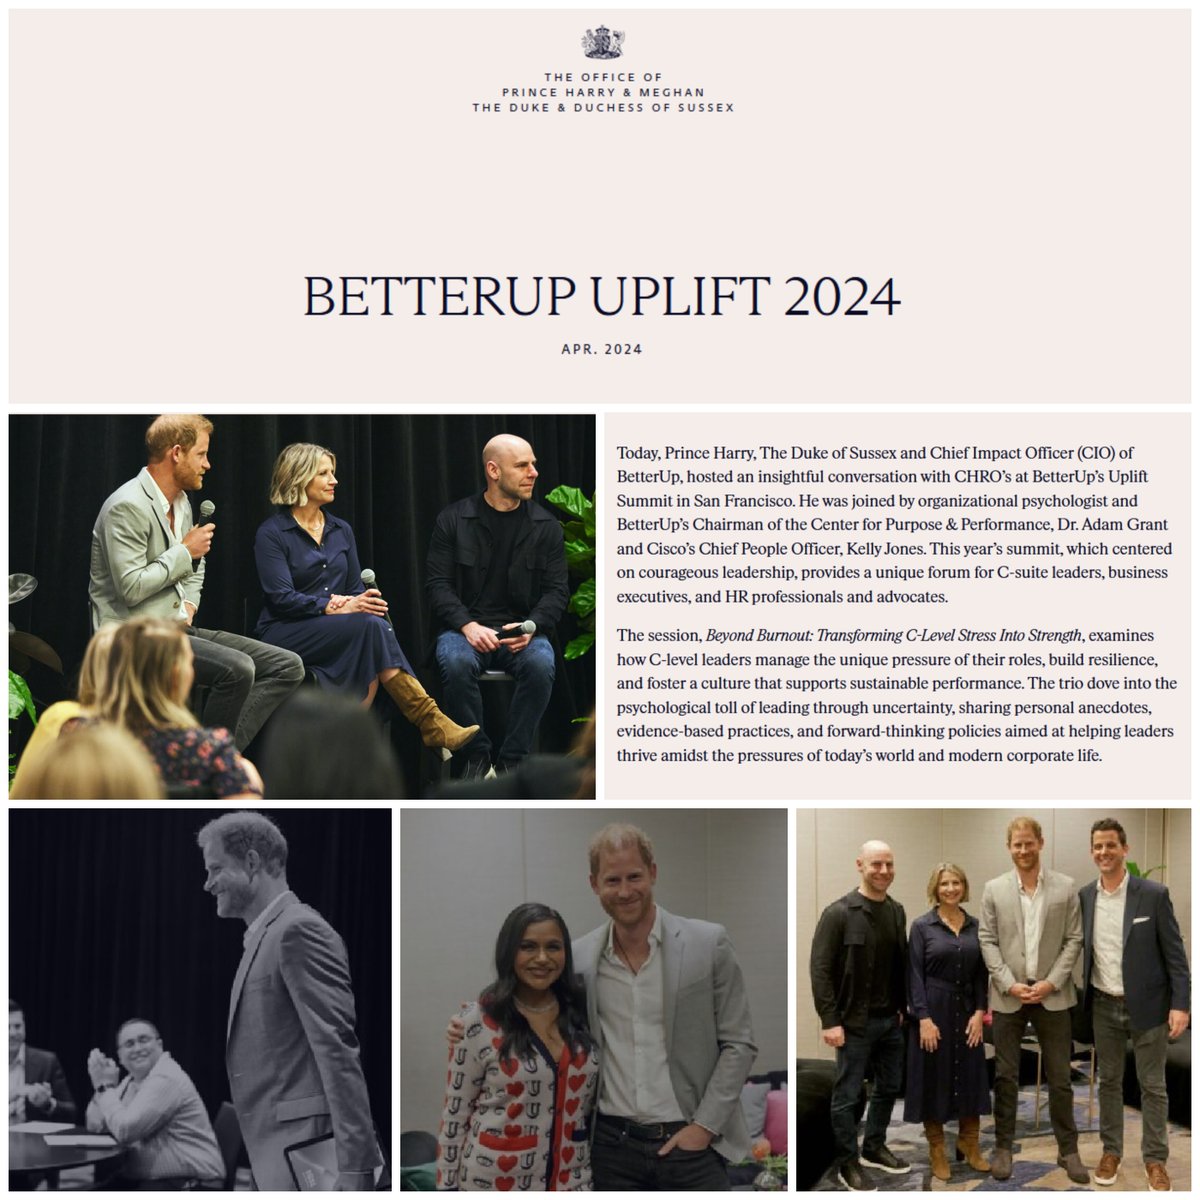 Yesterday, Prince Harry, The Duke of Sussex and Chief Impact Officer (CIO) of BetterUp, hosted an insightful conversation with CHRO’s at BetterUp’s Uplift Summit in San Francisco.